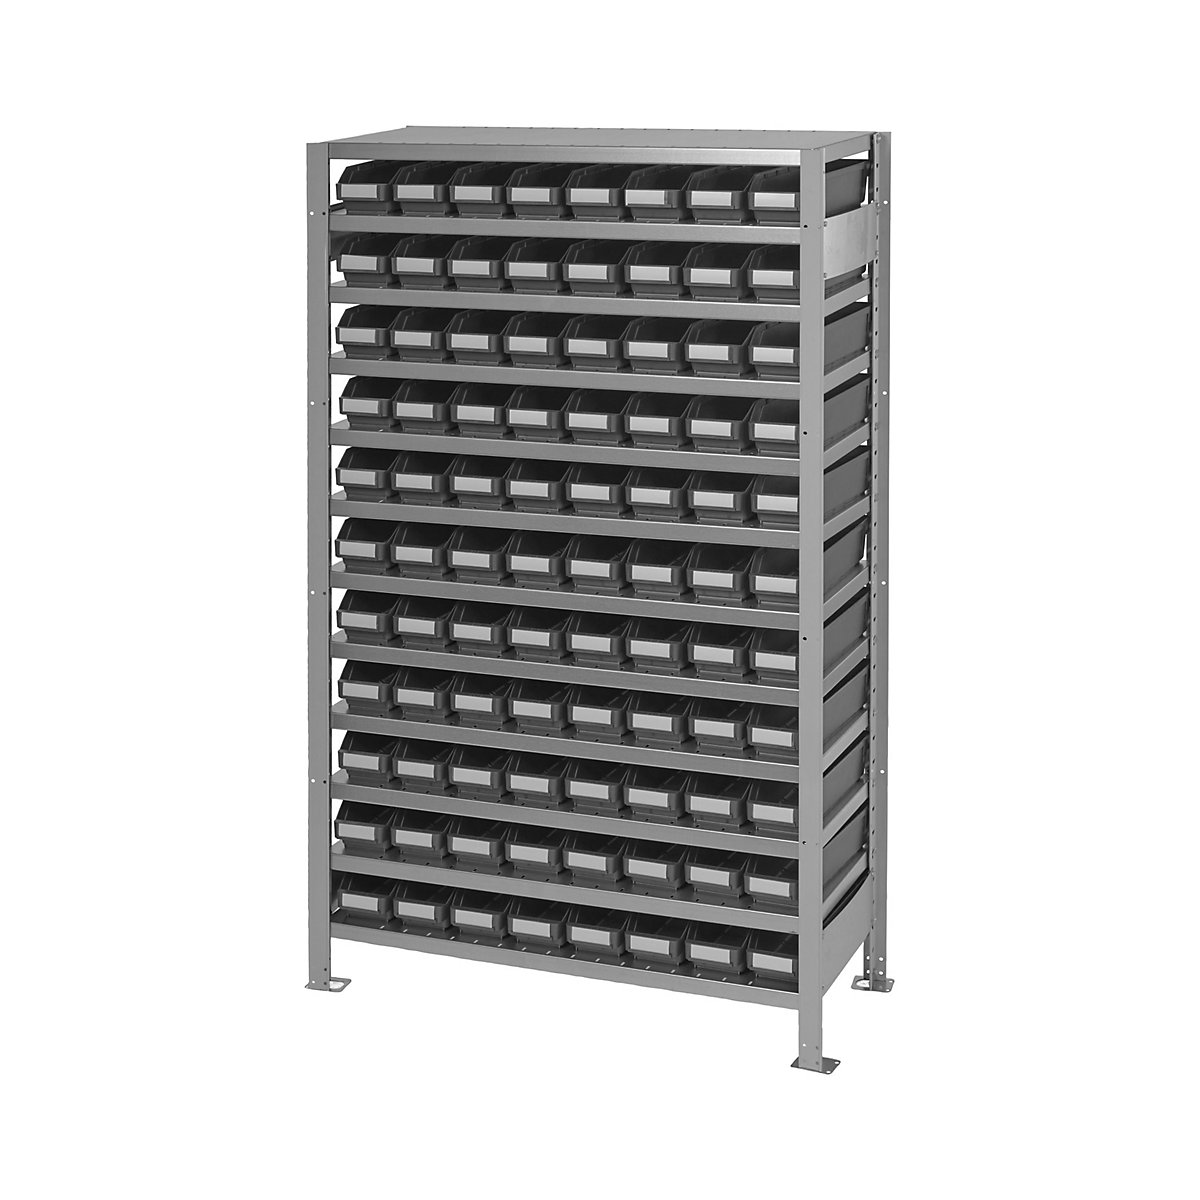 STEMO – Boltless shelving unit, with ESD open fronted storage bins, HxWxD 1790 x 1000 x 300 mm, 88 open fronted storage bins